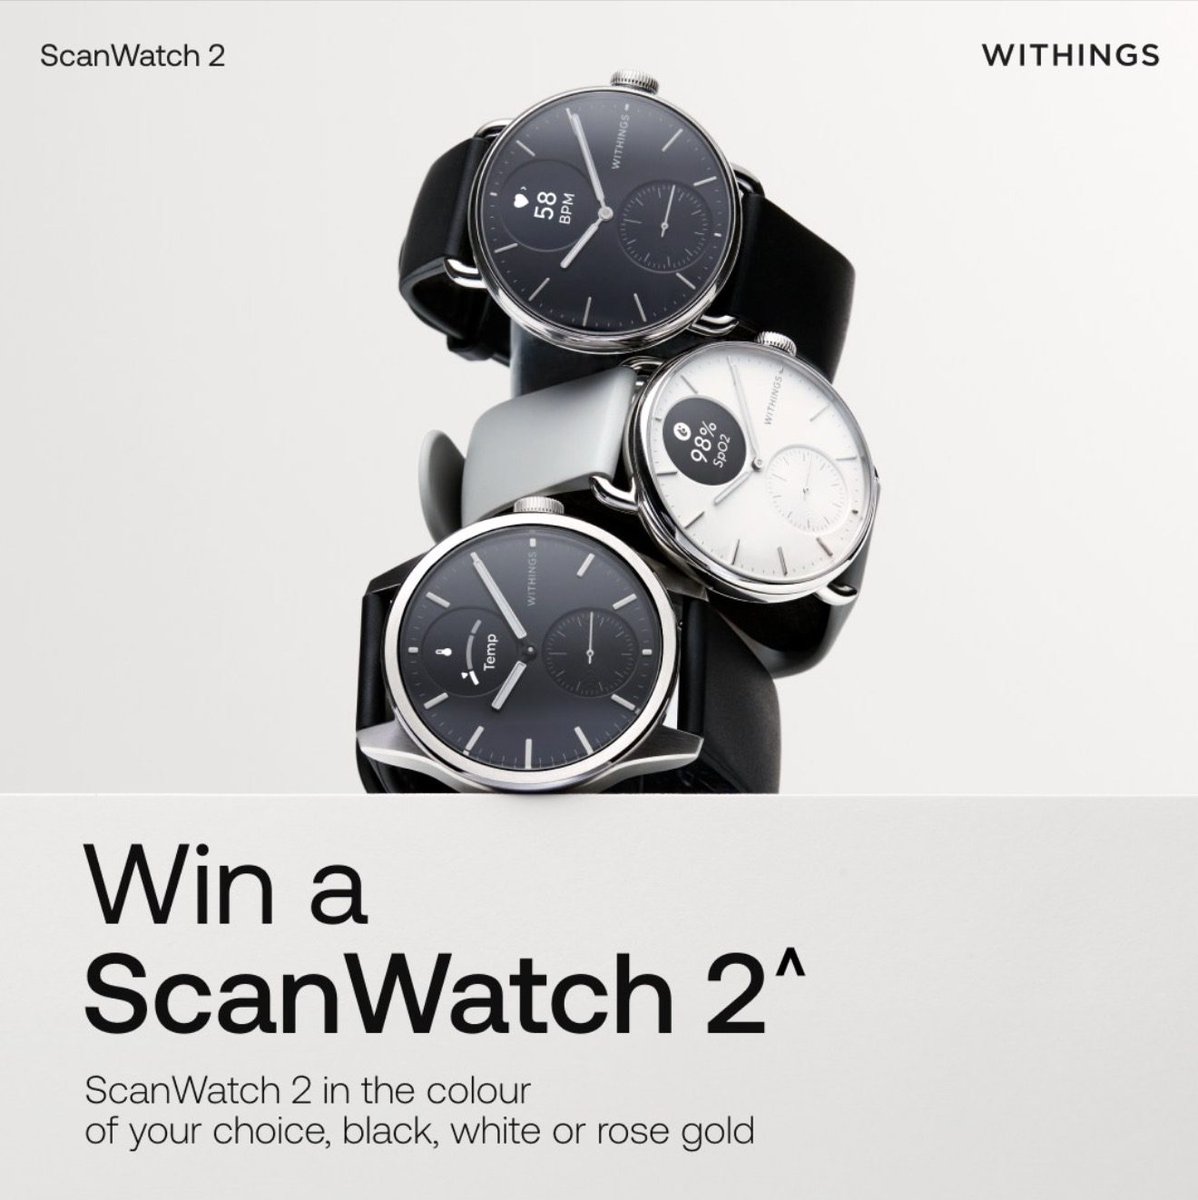 🏆 JB Hi-Fi Mother’s Day Competition: Win a Withings ScanWatch 2 in the colour of your choice
👉 competitionsinaustralia.com/jb-hi-fi-mothe…

#aus🇦🇺 #competition #comp #comps #australia #competitions #competitionaustralia #competitiontime